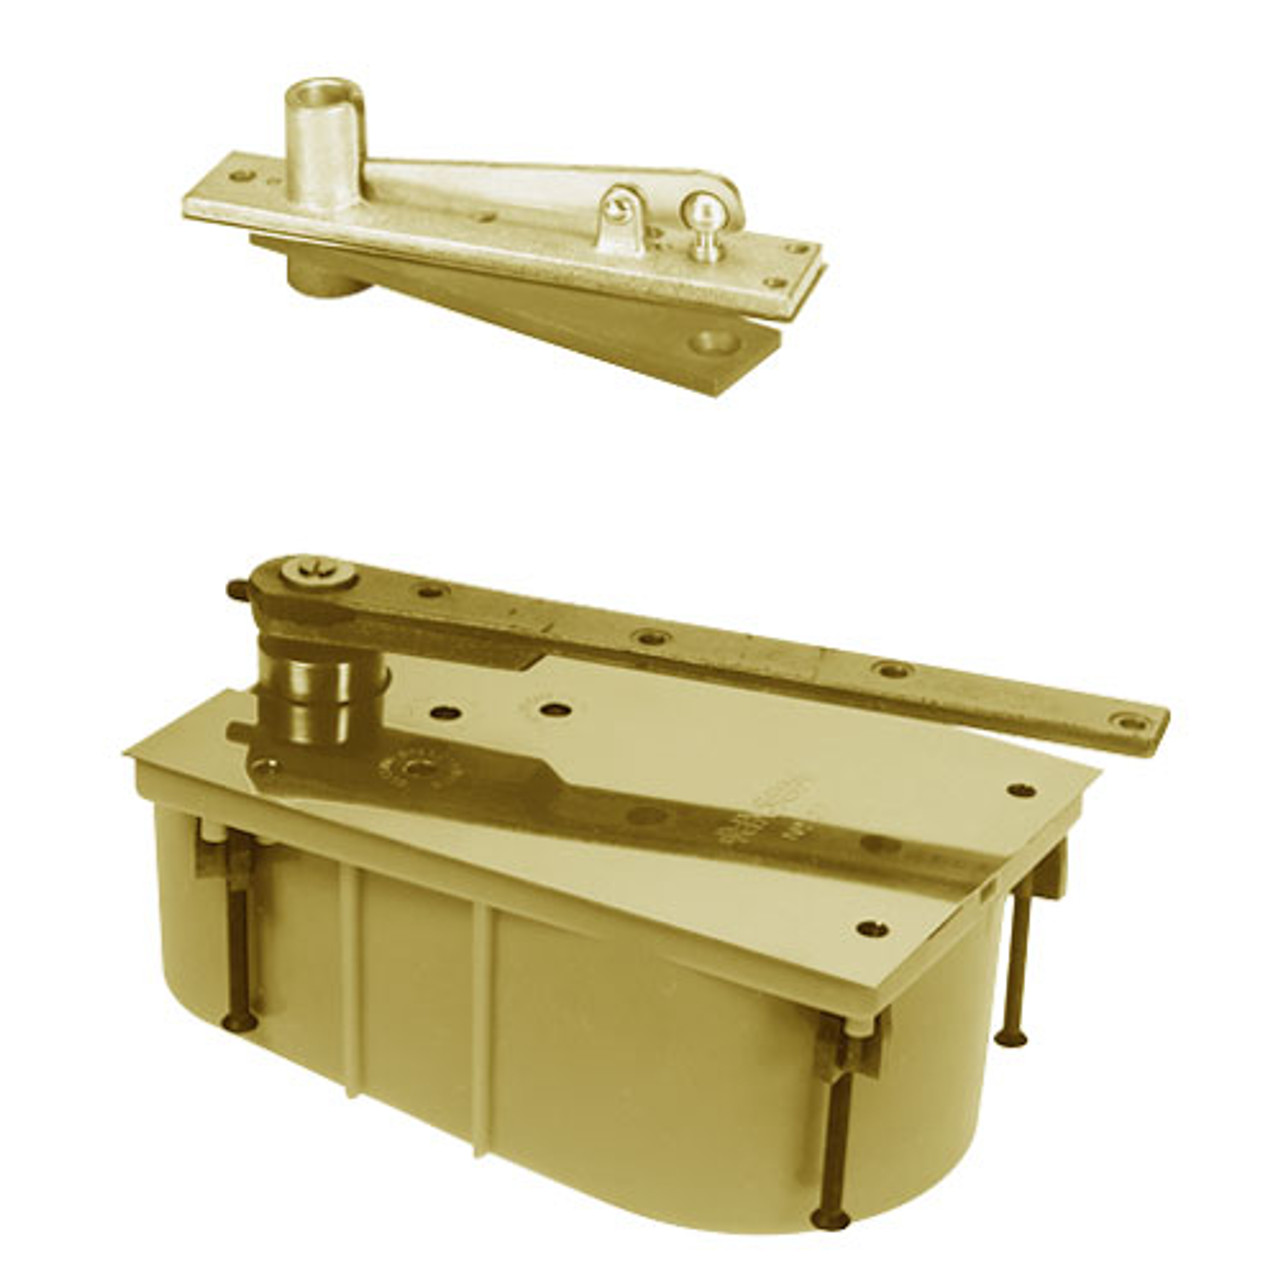 PH28-95S-554-CWF-LH-606 Rixson 28 Series Heavy Duty Single Acting Center Hung Floor Closer with Concealed Arm in Satin Brass Finish